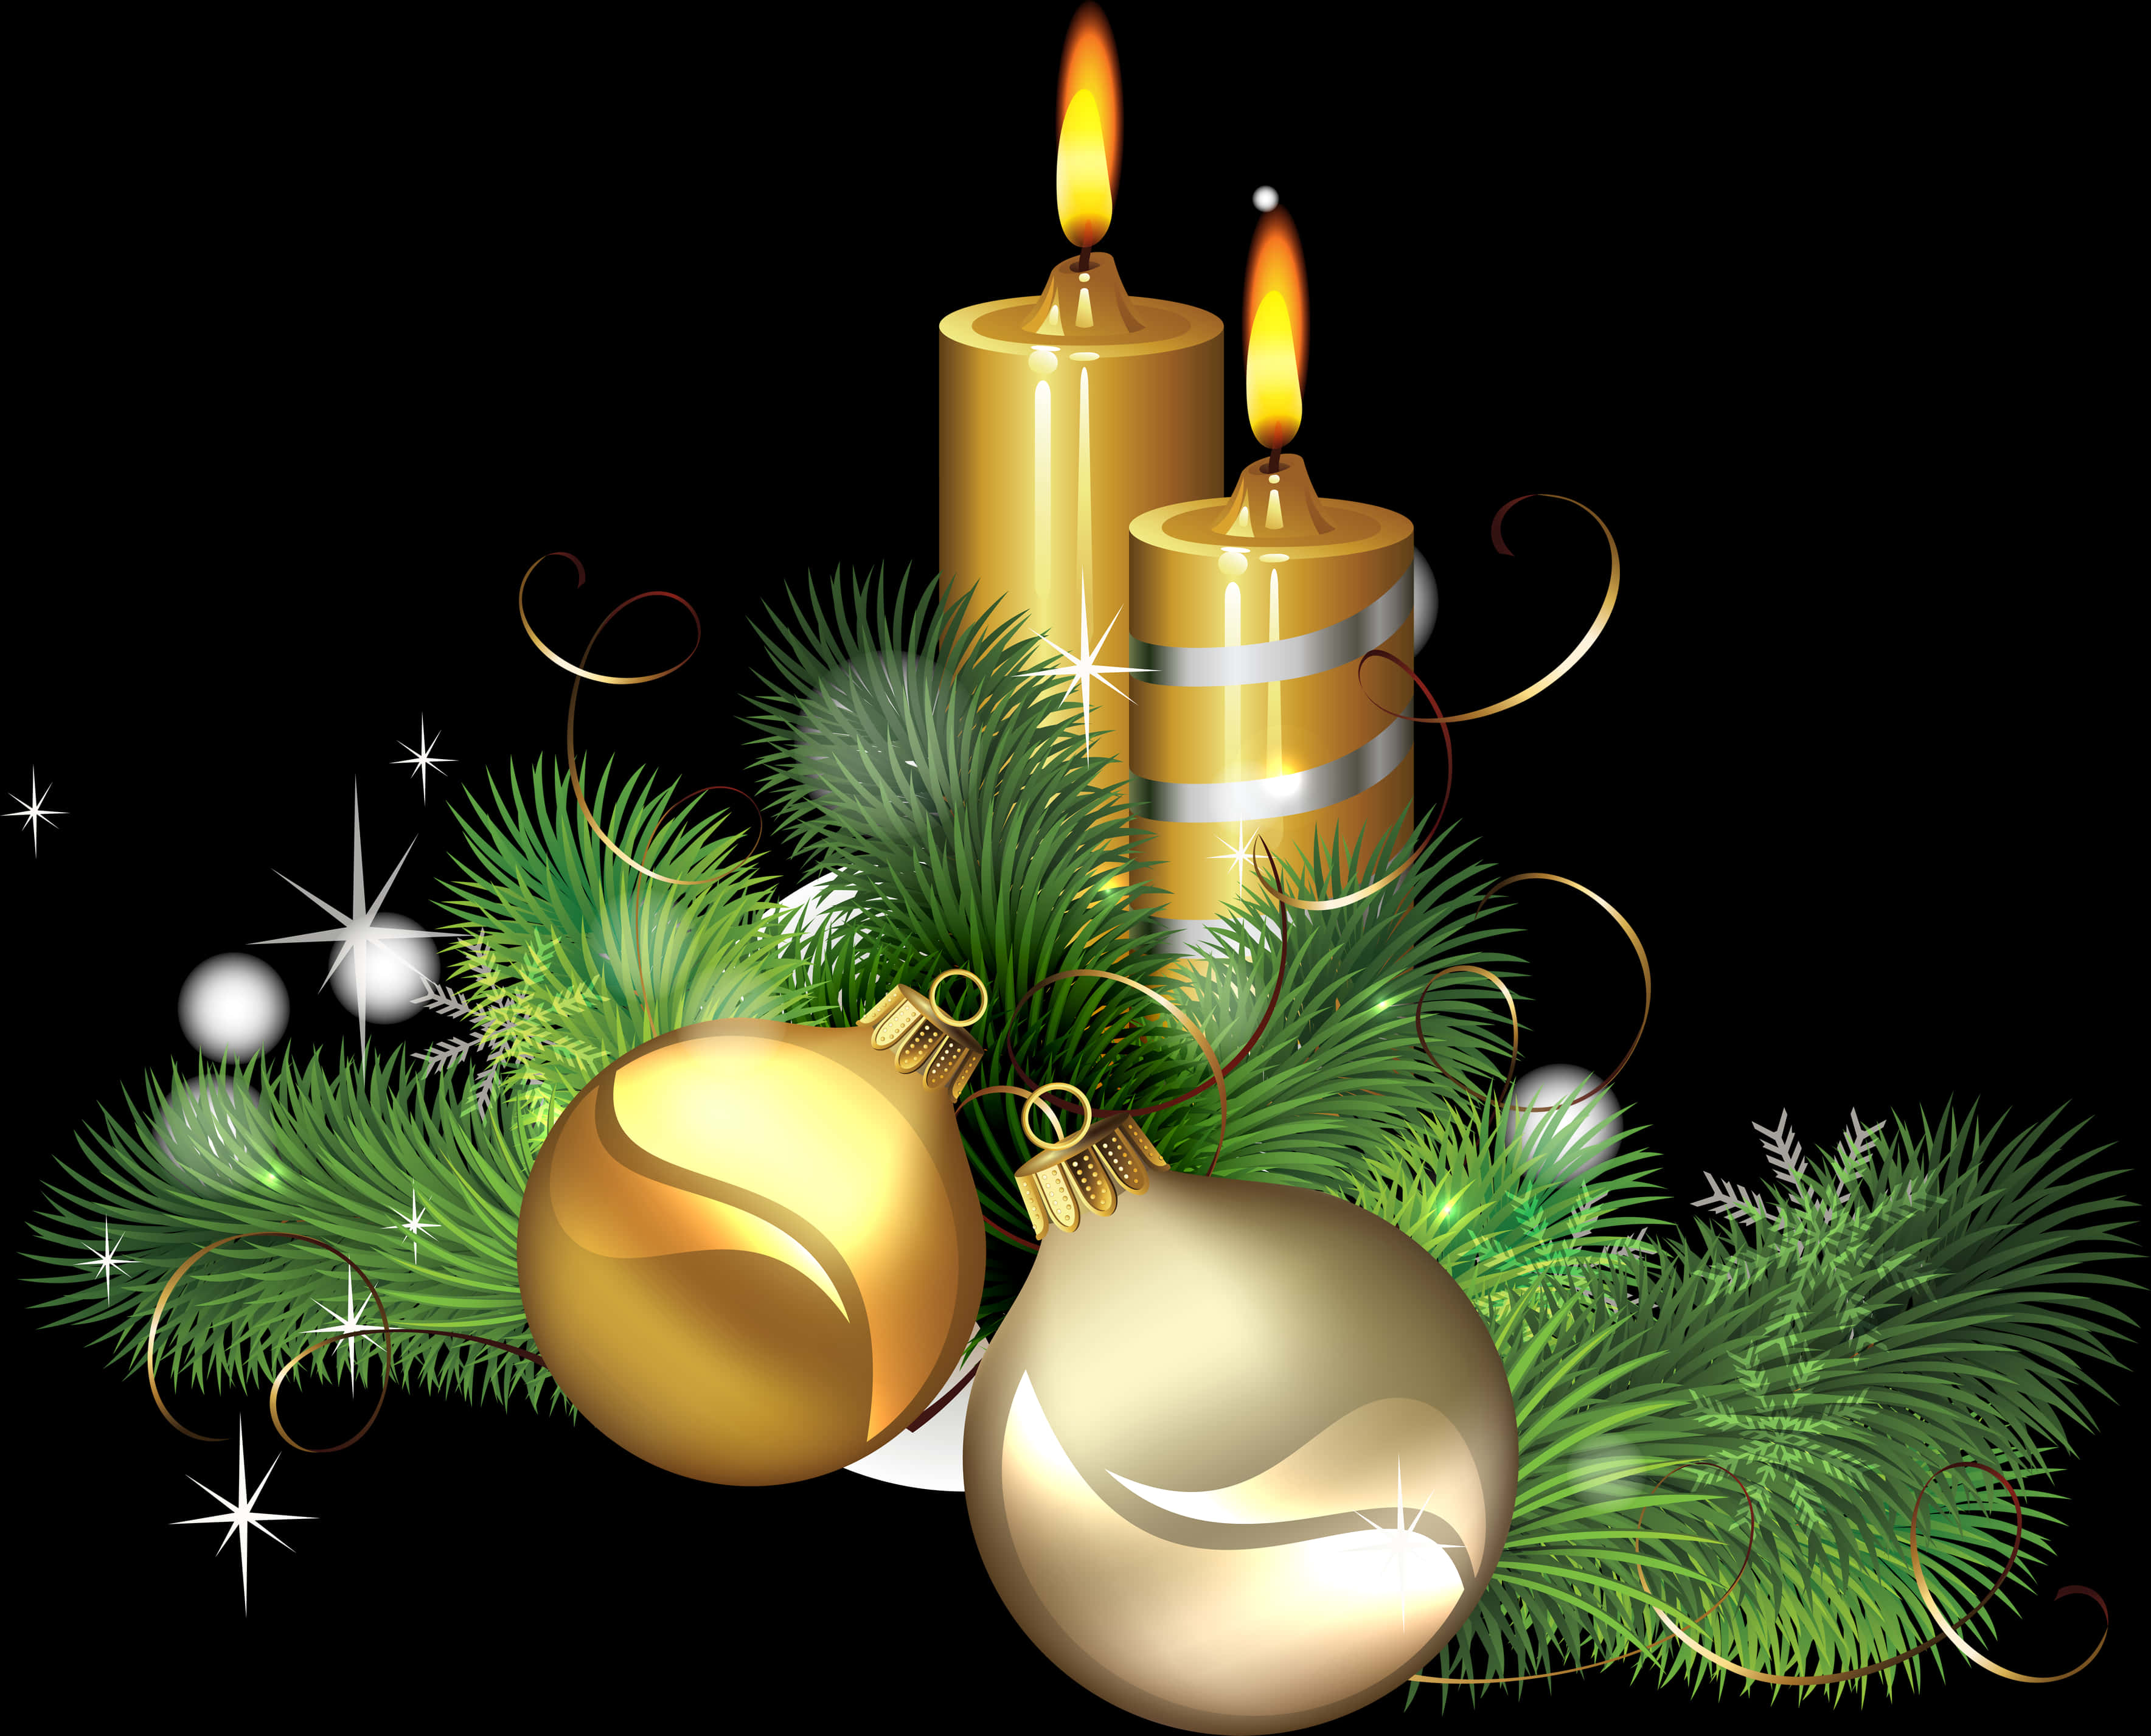 A Candle And Ornaments With Pine Needles